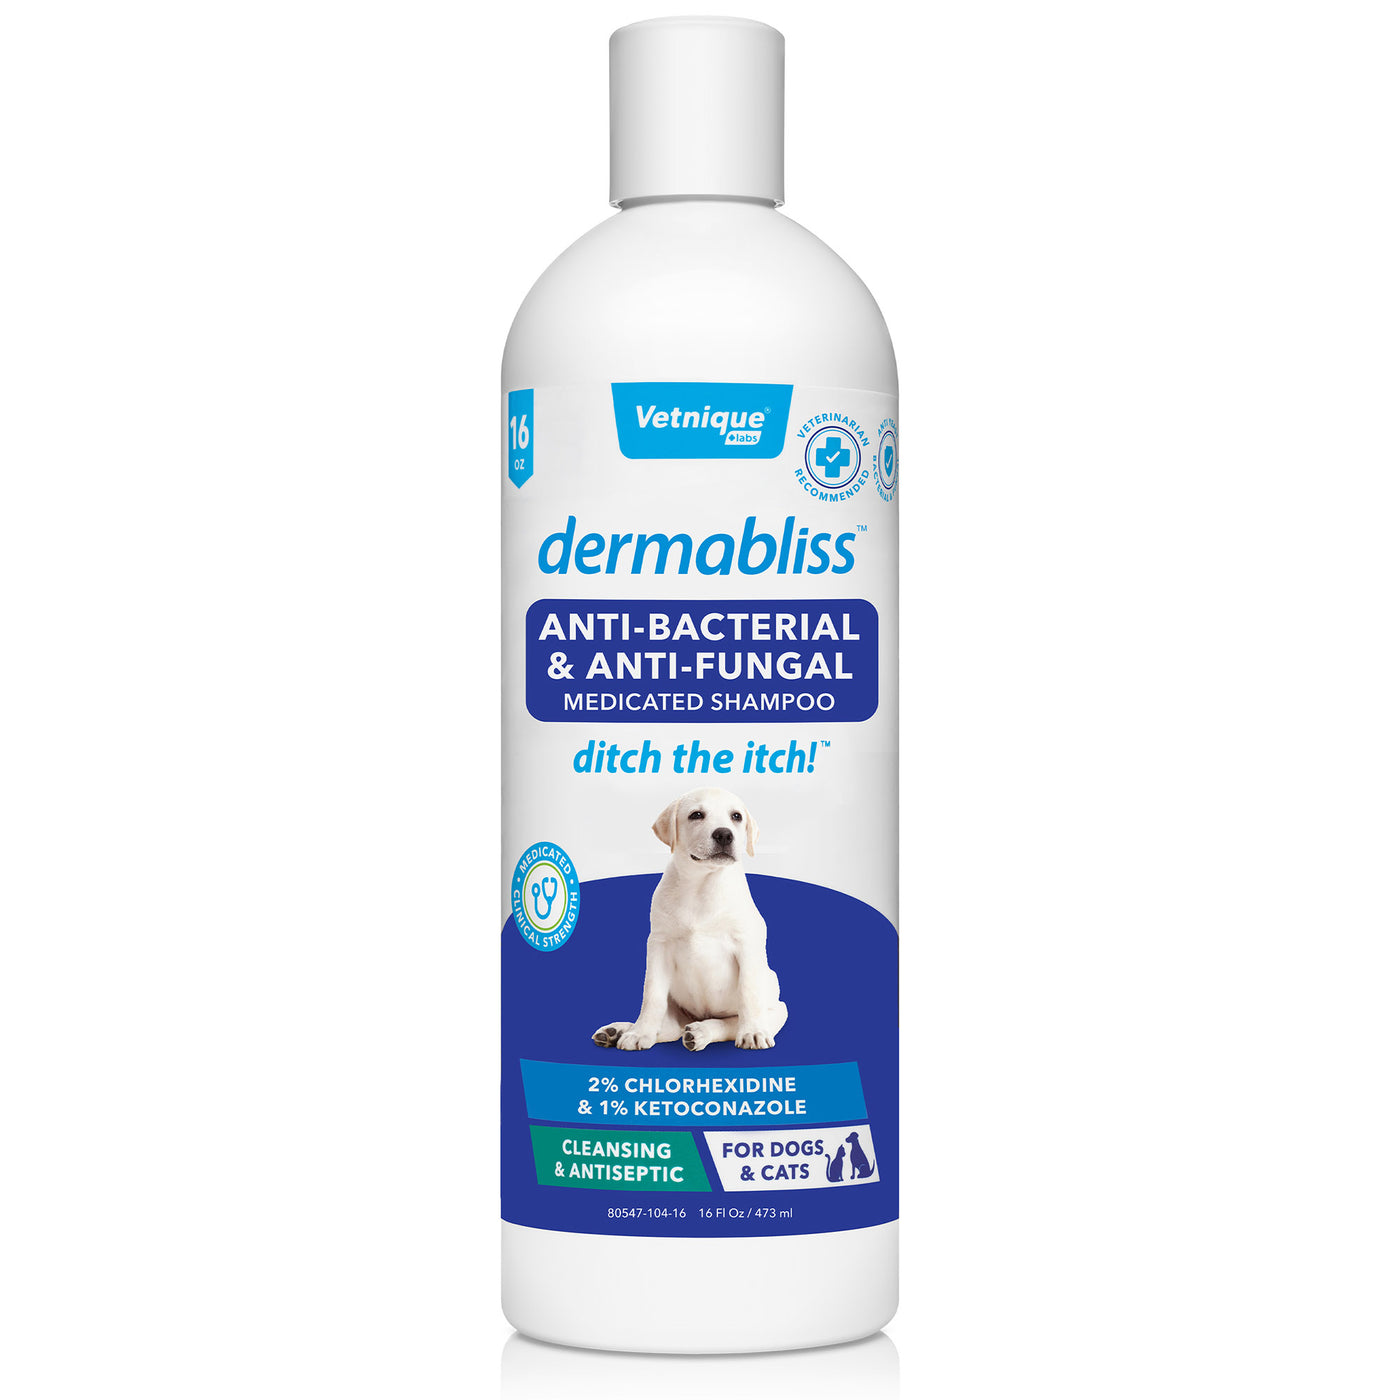 Dermabliss Anti-Bacterial and Anti-Fungal Medicated Shampoo